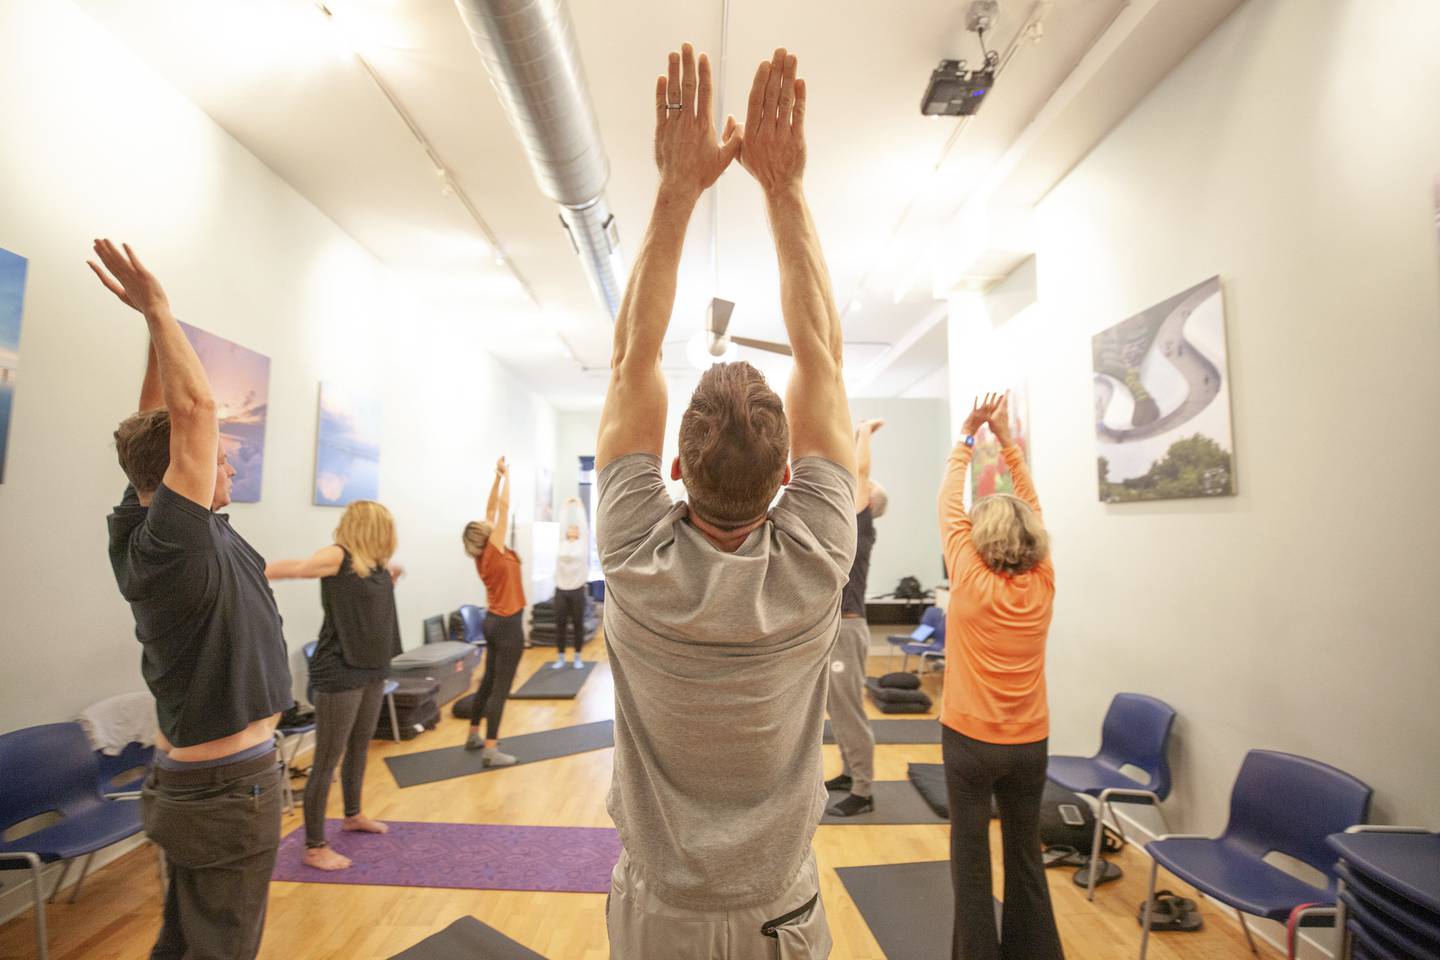 Michael Peterson, center, stretches during a mindfulness and meditation seminar for employees of Dream Town Realty at their training facility in Chicago on Sept. 14, 2022.